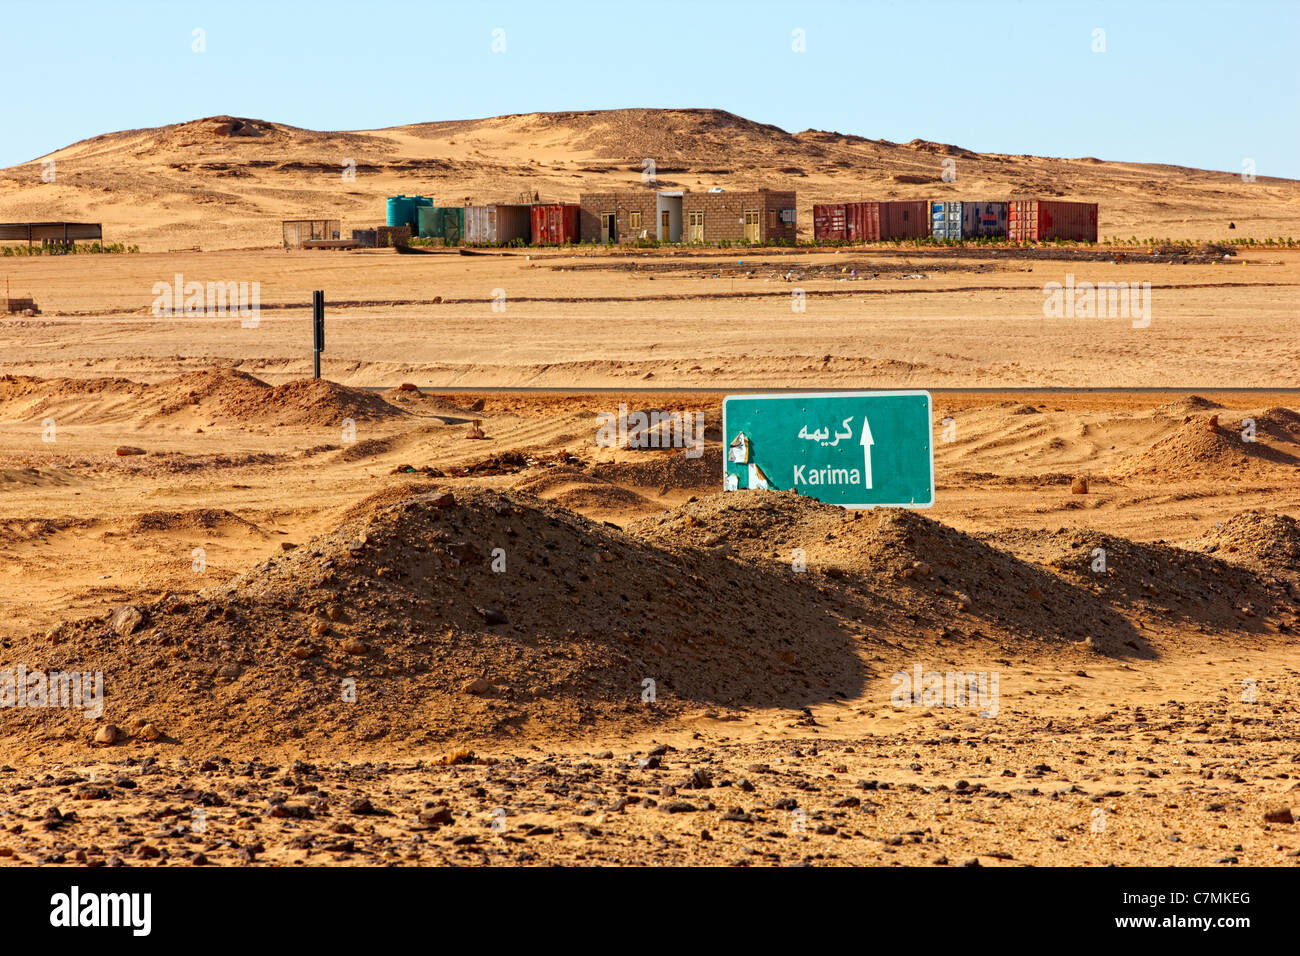 Road sign for Karima, Northern Sudan, Africa Stock Photo